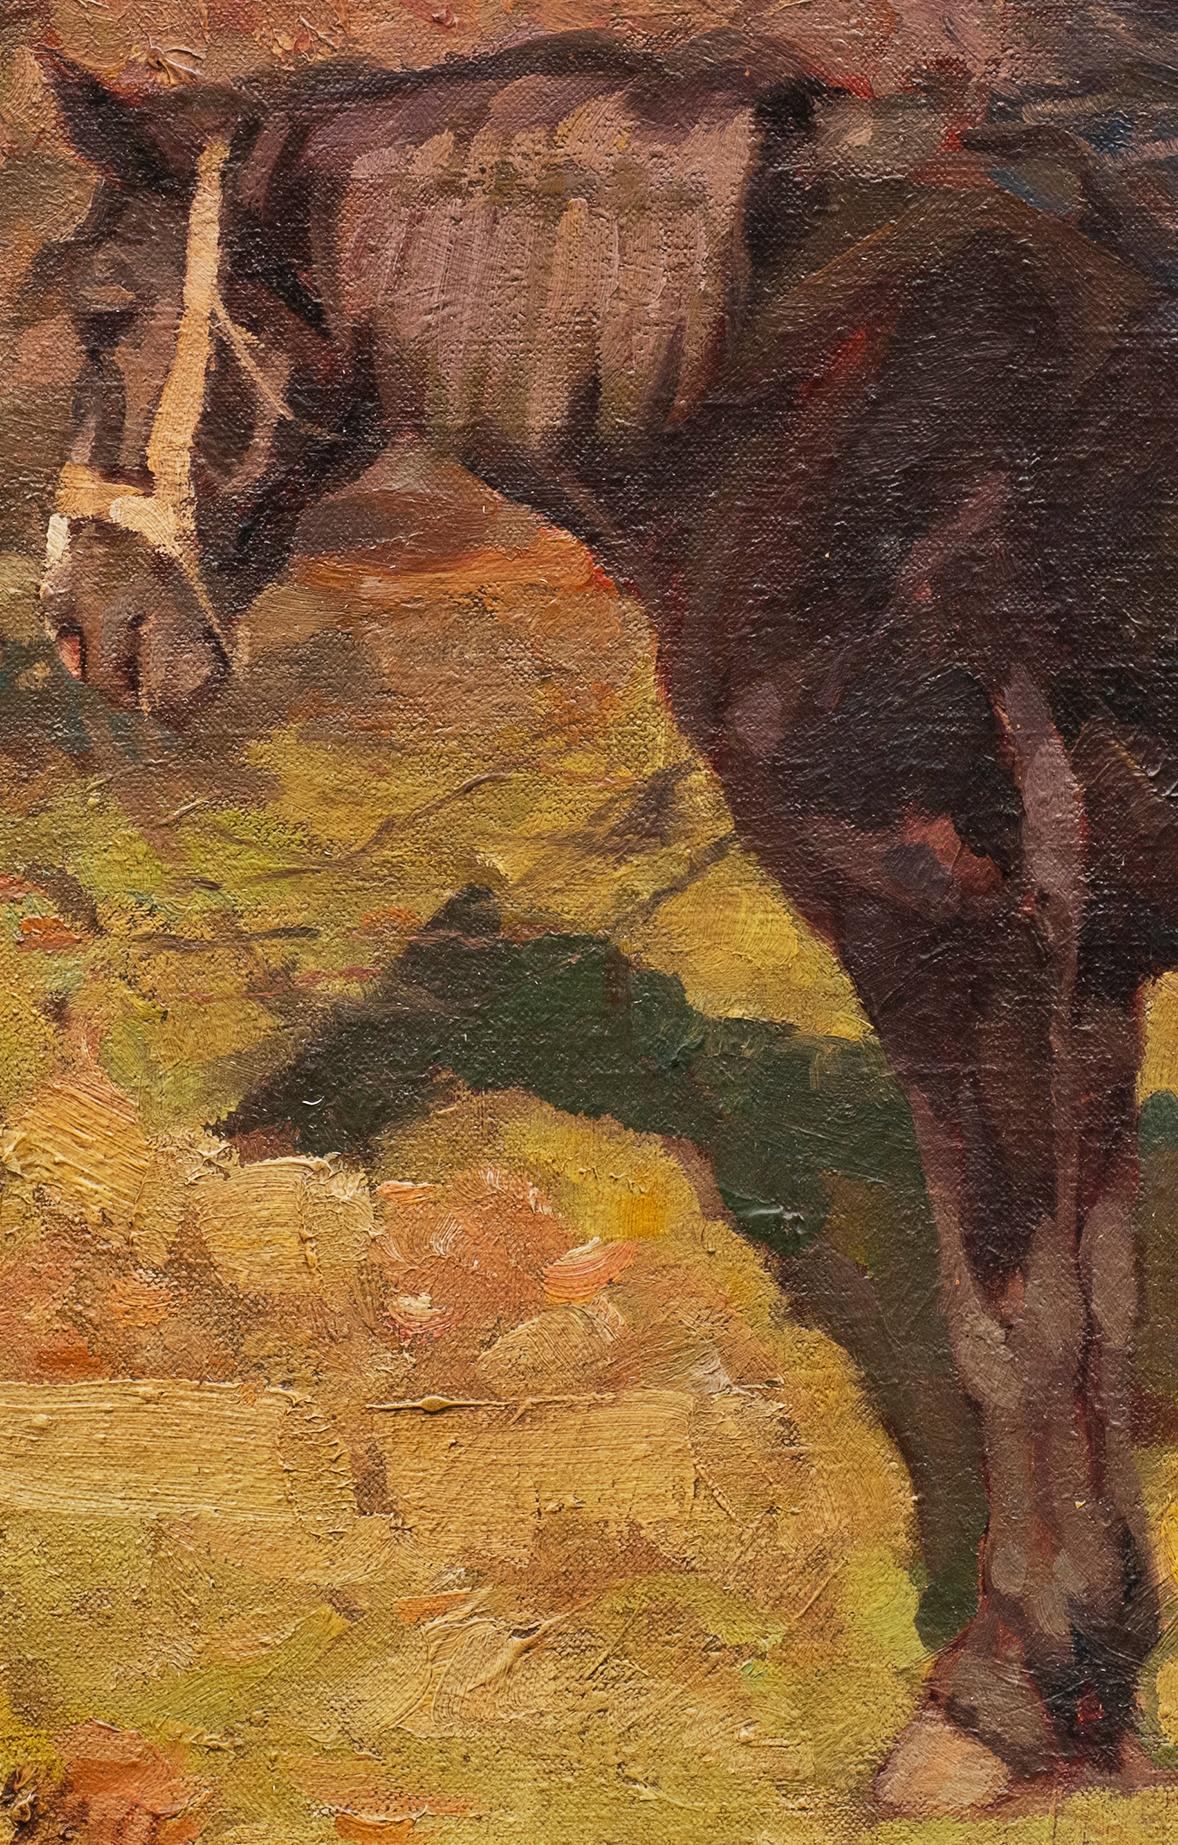 Antique Horse Painting
“Standing Horse in Pasture”
Georg Wolf (Germany 1882-1962)
Oil on canvas
Signed and dated 1911 lower left
19 1/2 x 23 1/2 (30 1/2 x 26 1/2 frame) inches

First notice the muzzle and how it's expressed. Wolf, with profound